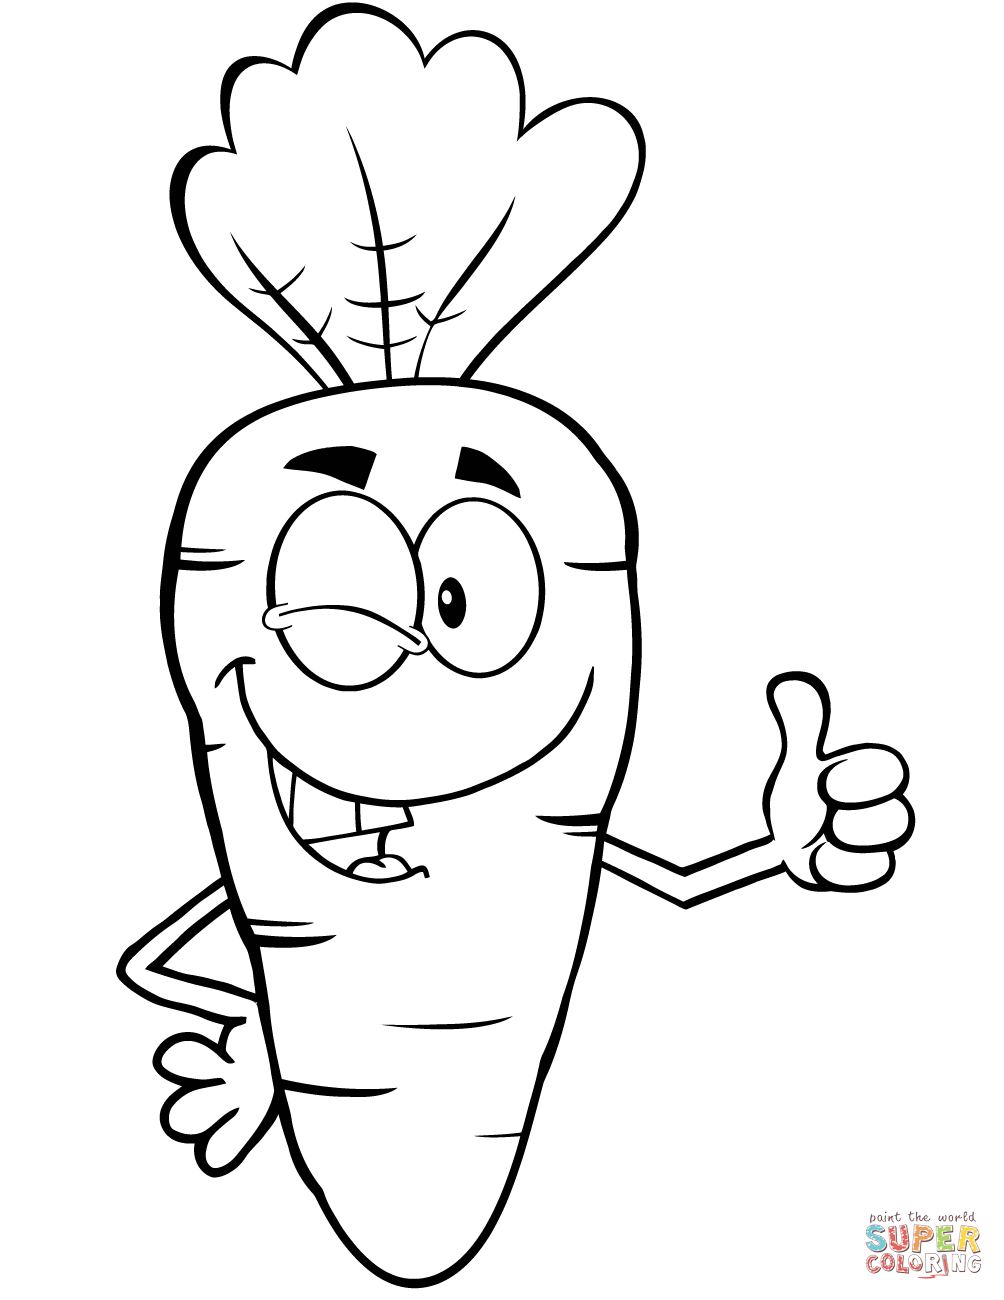 Winking cartoon carrot character coloring page free printable coloring pages